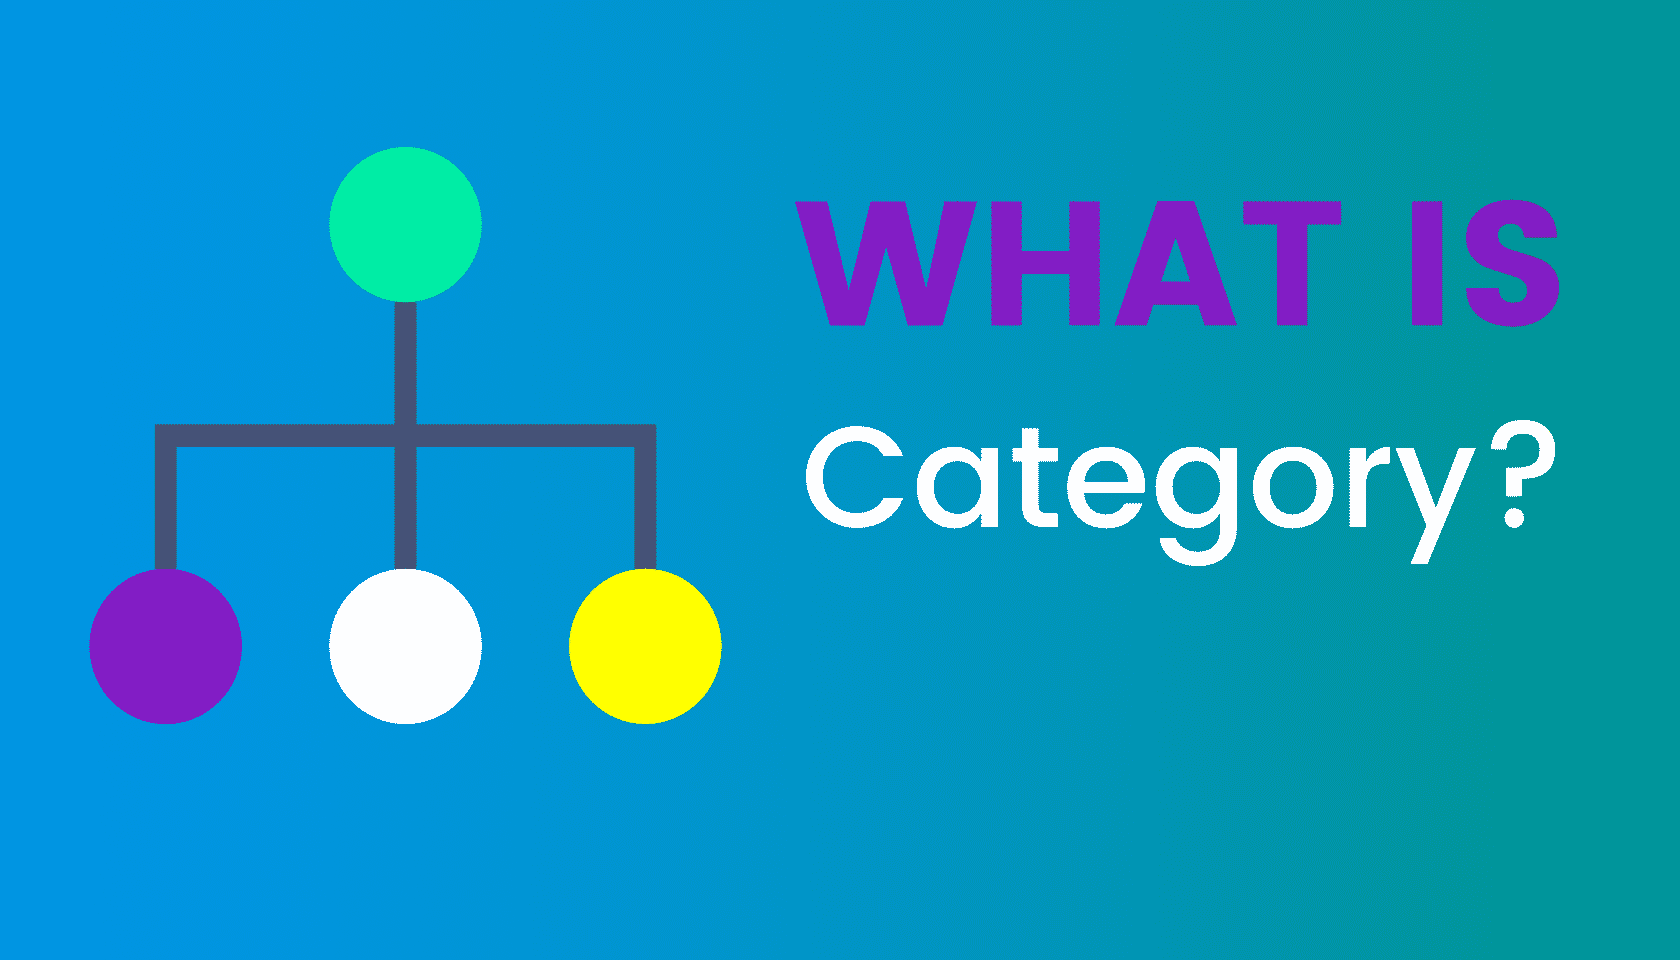 What is: Category (Categories)